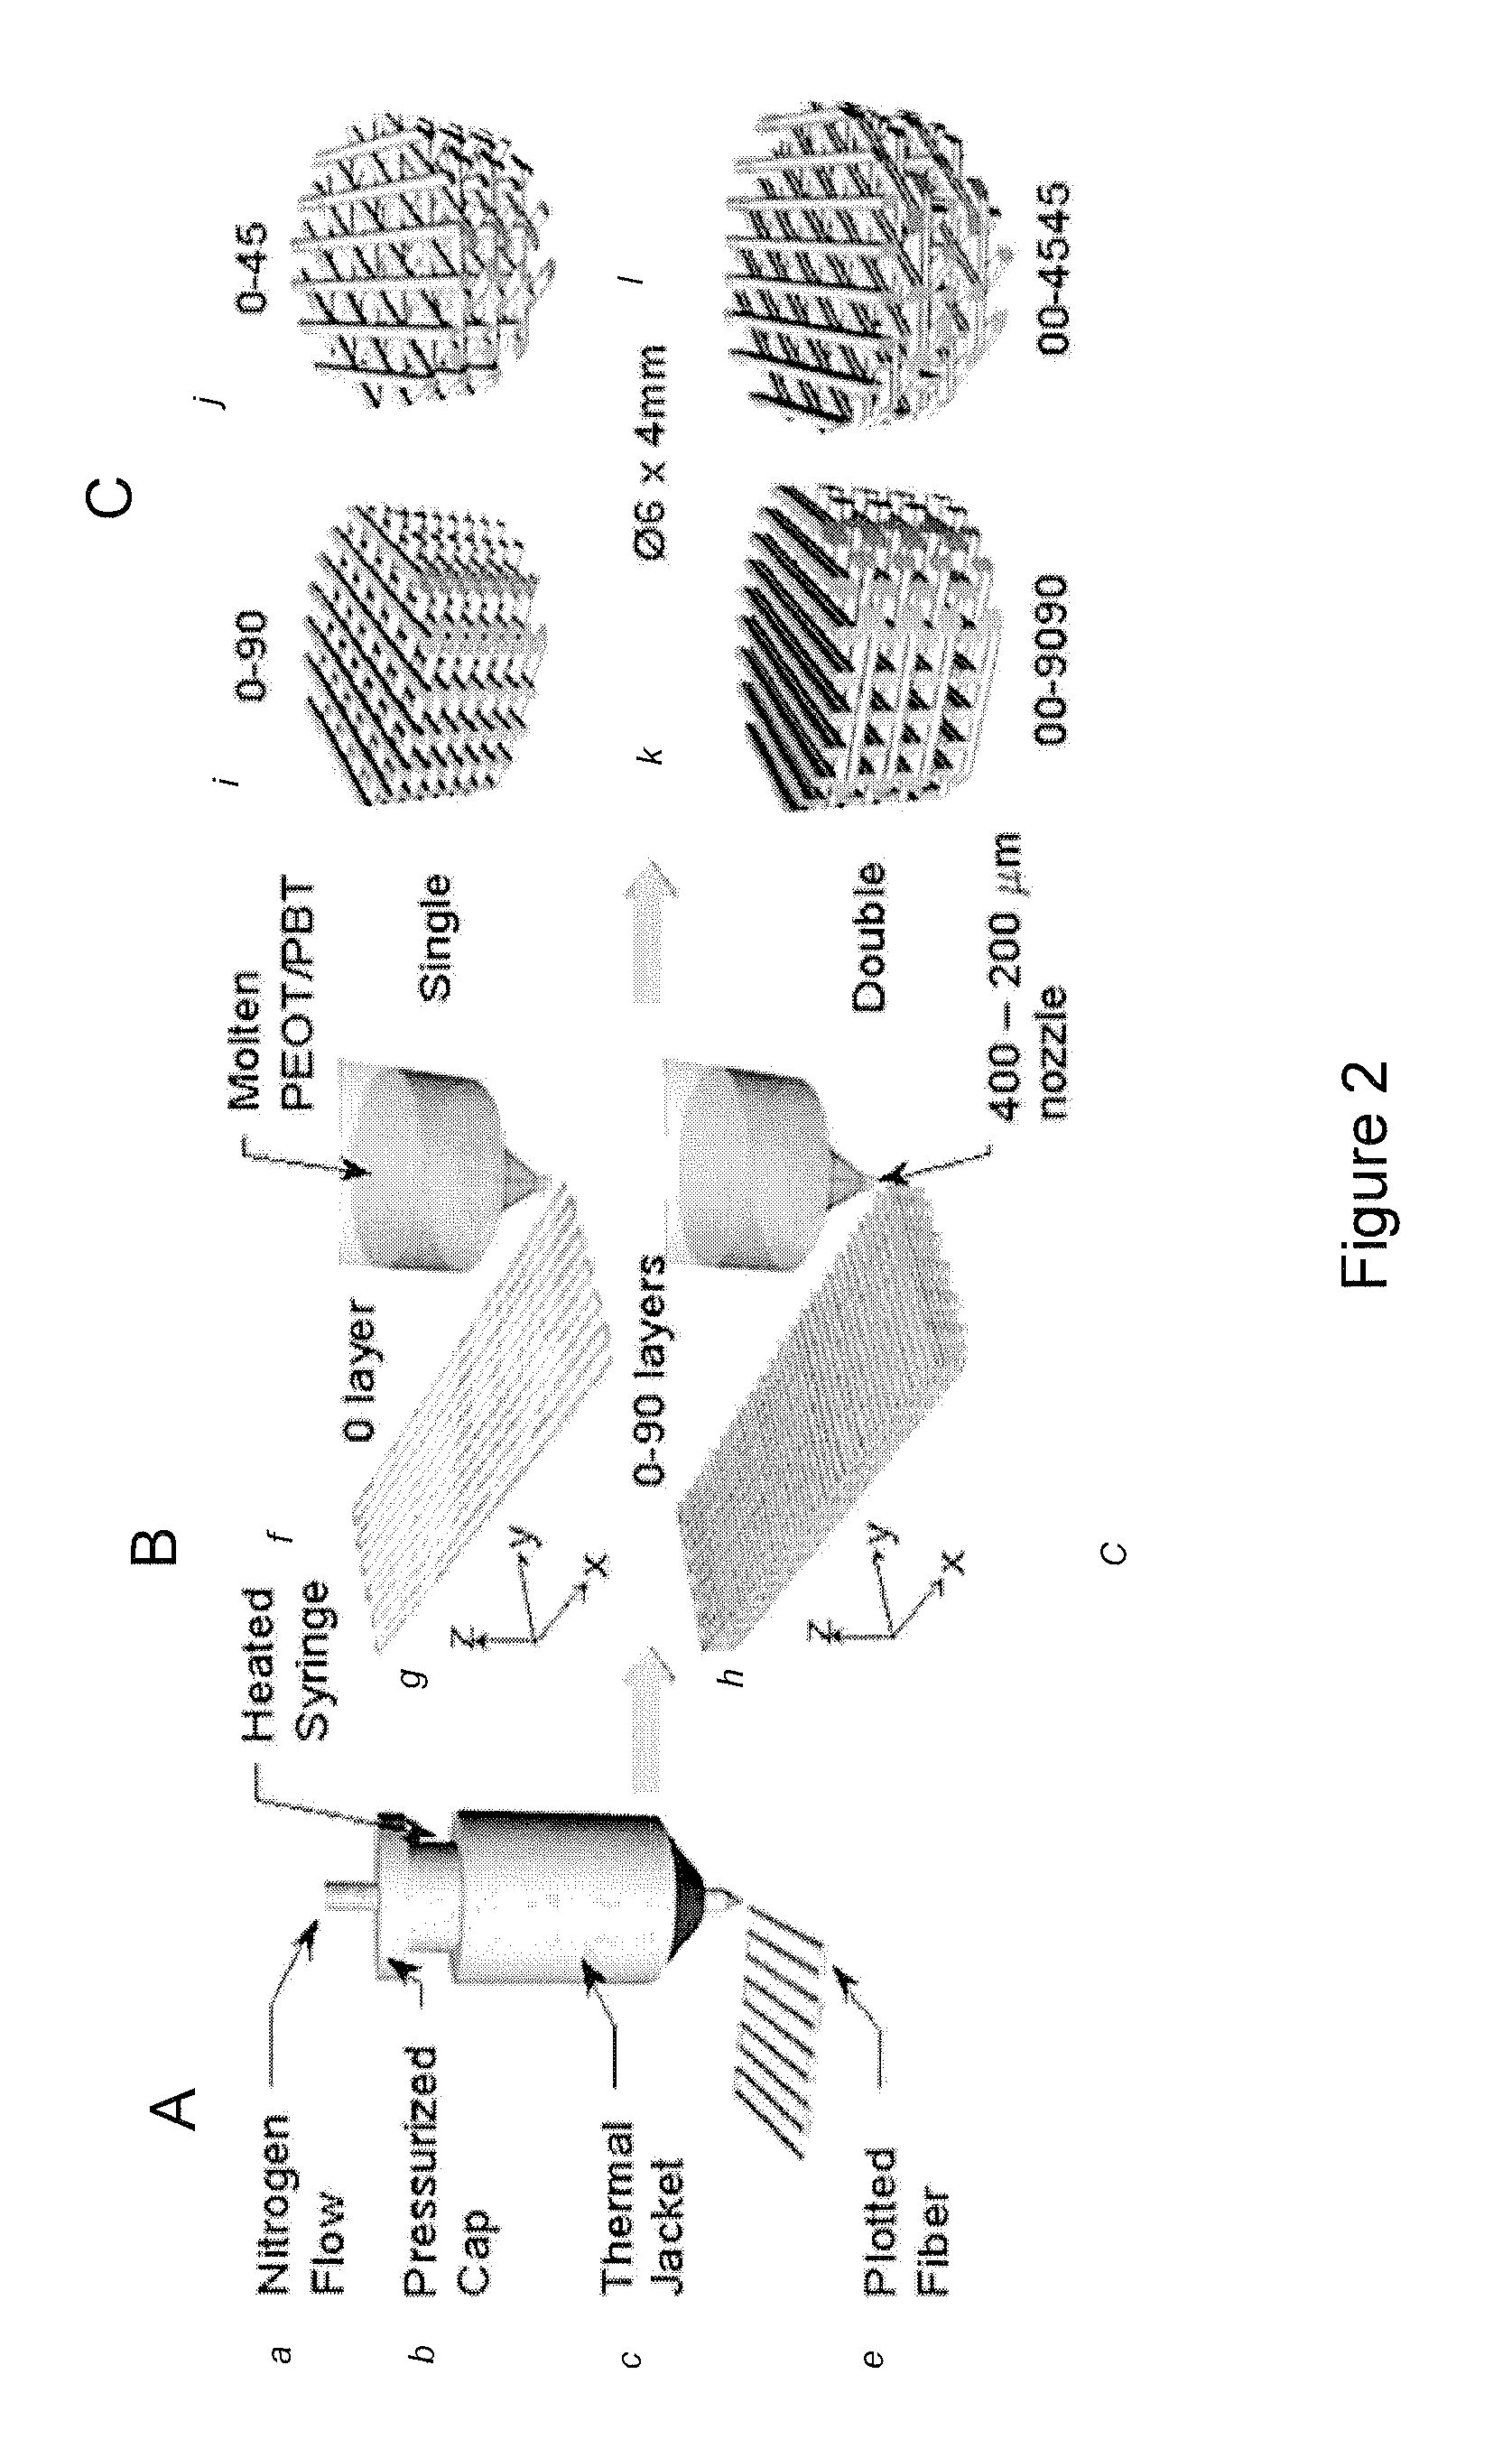 High throughput multiwell system for culturing 3D tissue constructs in-vitro or in-vivo, method for producing said multiwell system and methods for preparing 3D tissue constructs from cells using said multiwell system